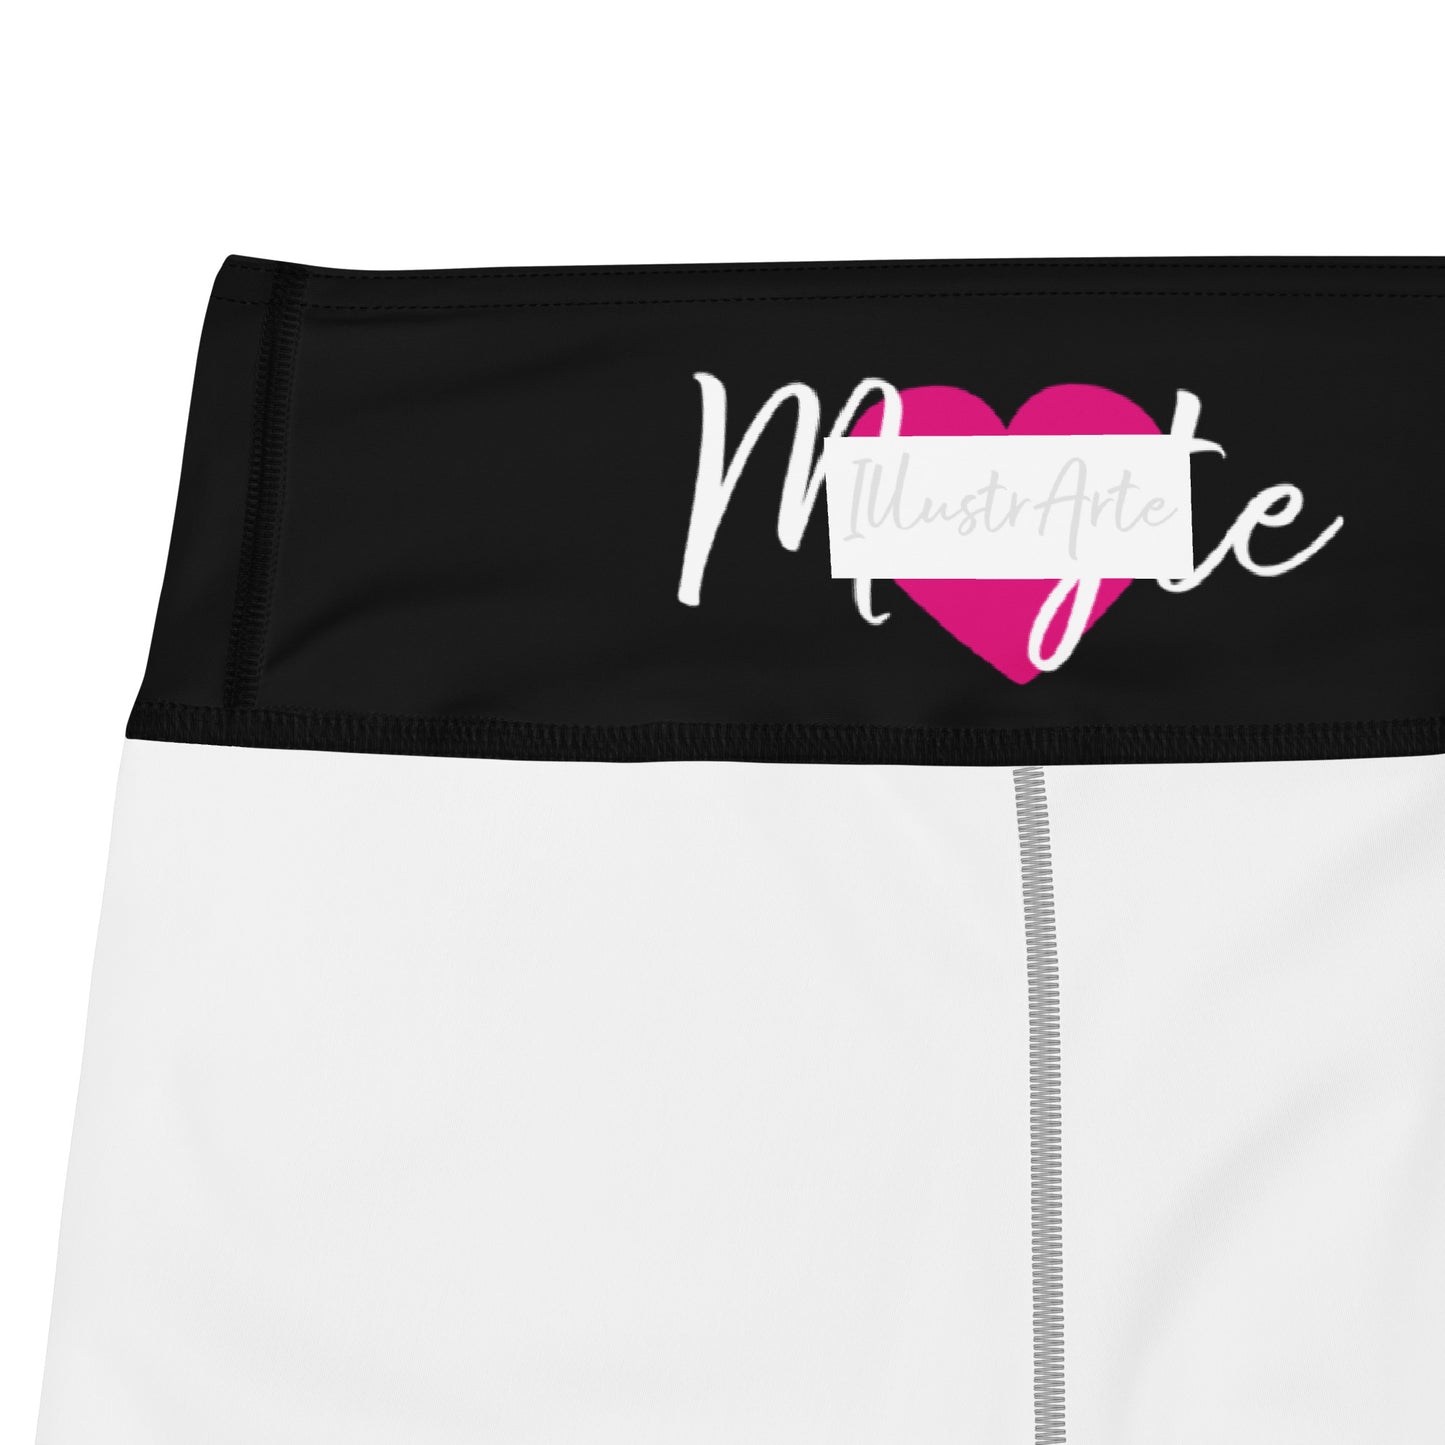 a white and black skirt with a pink heart